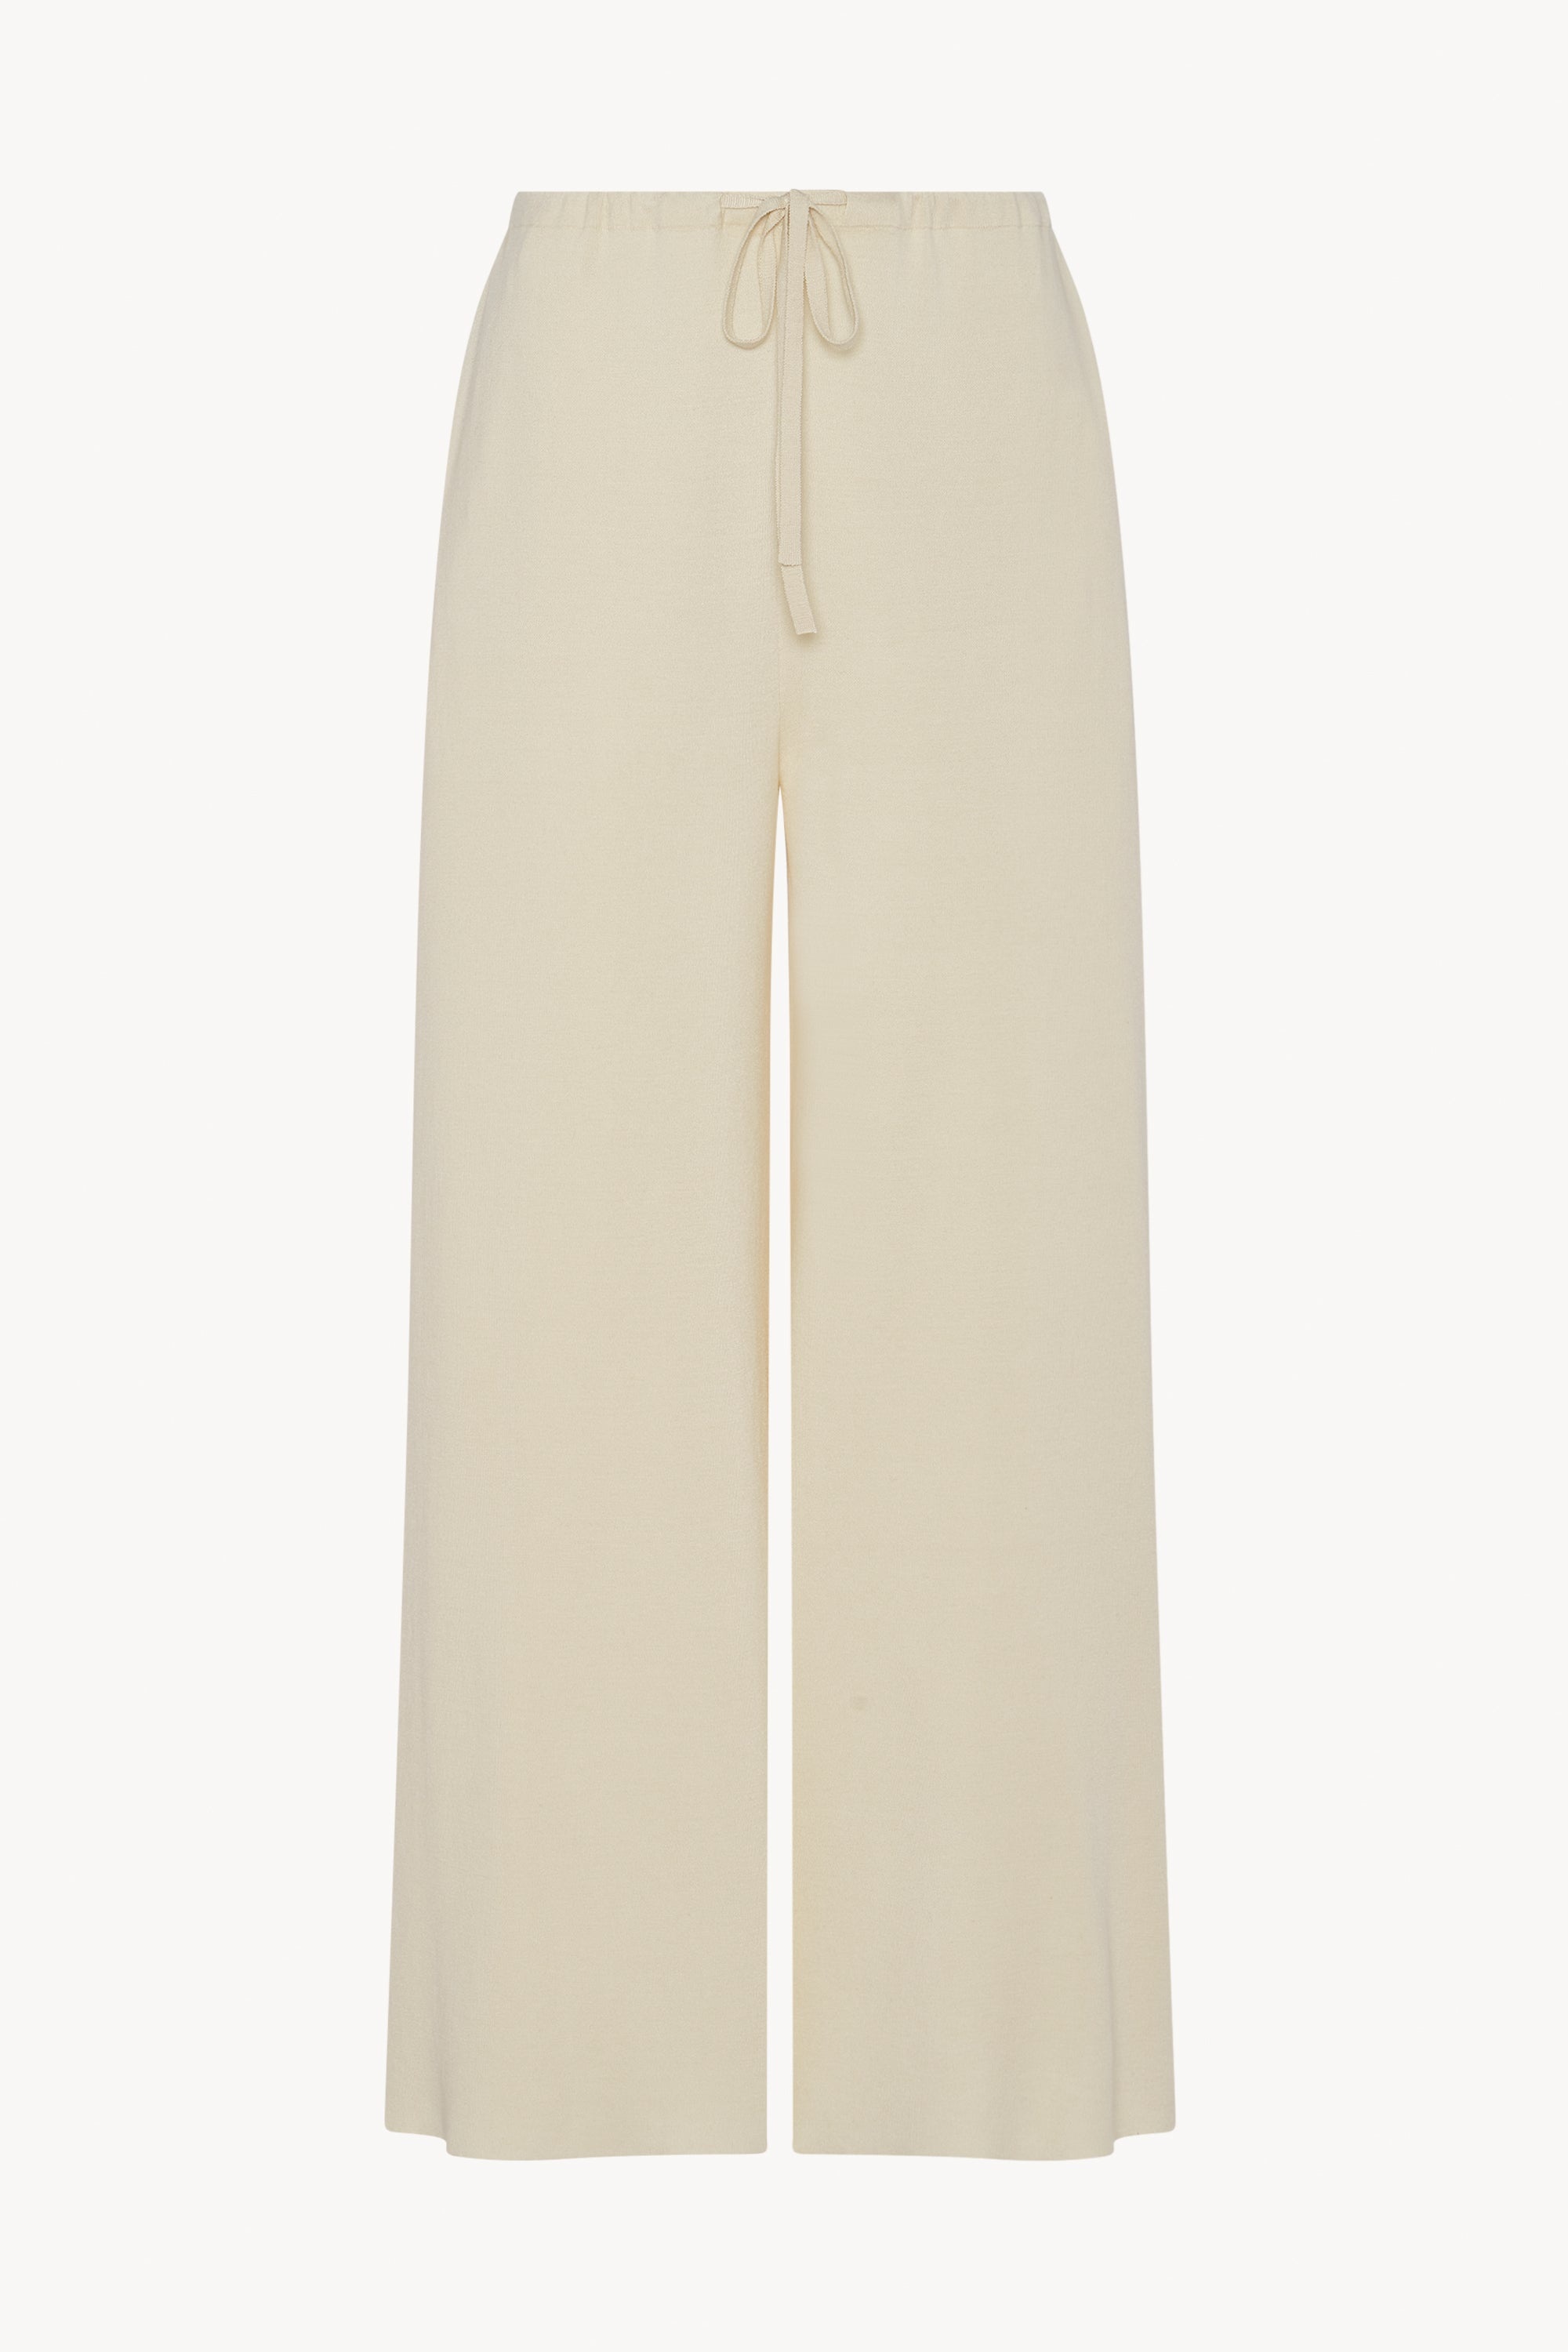 Delphine Pant in Silk and Cotton - 1